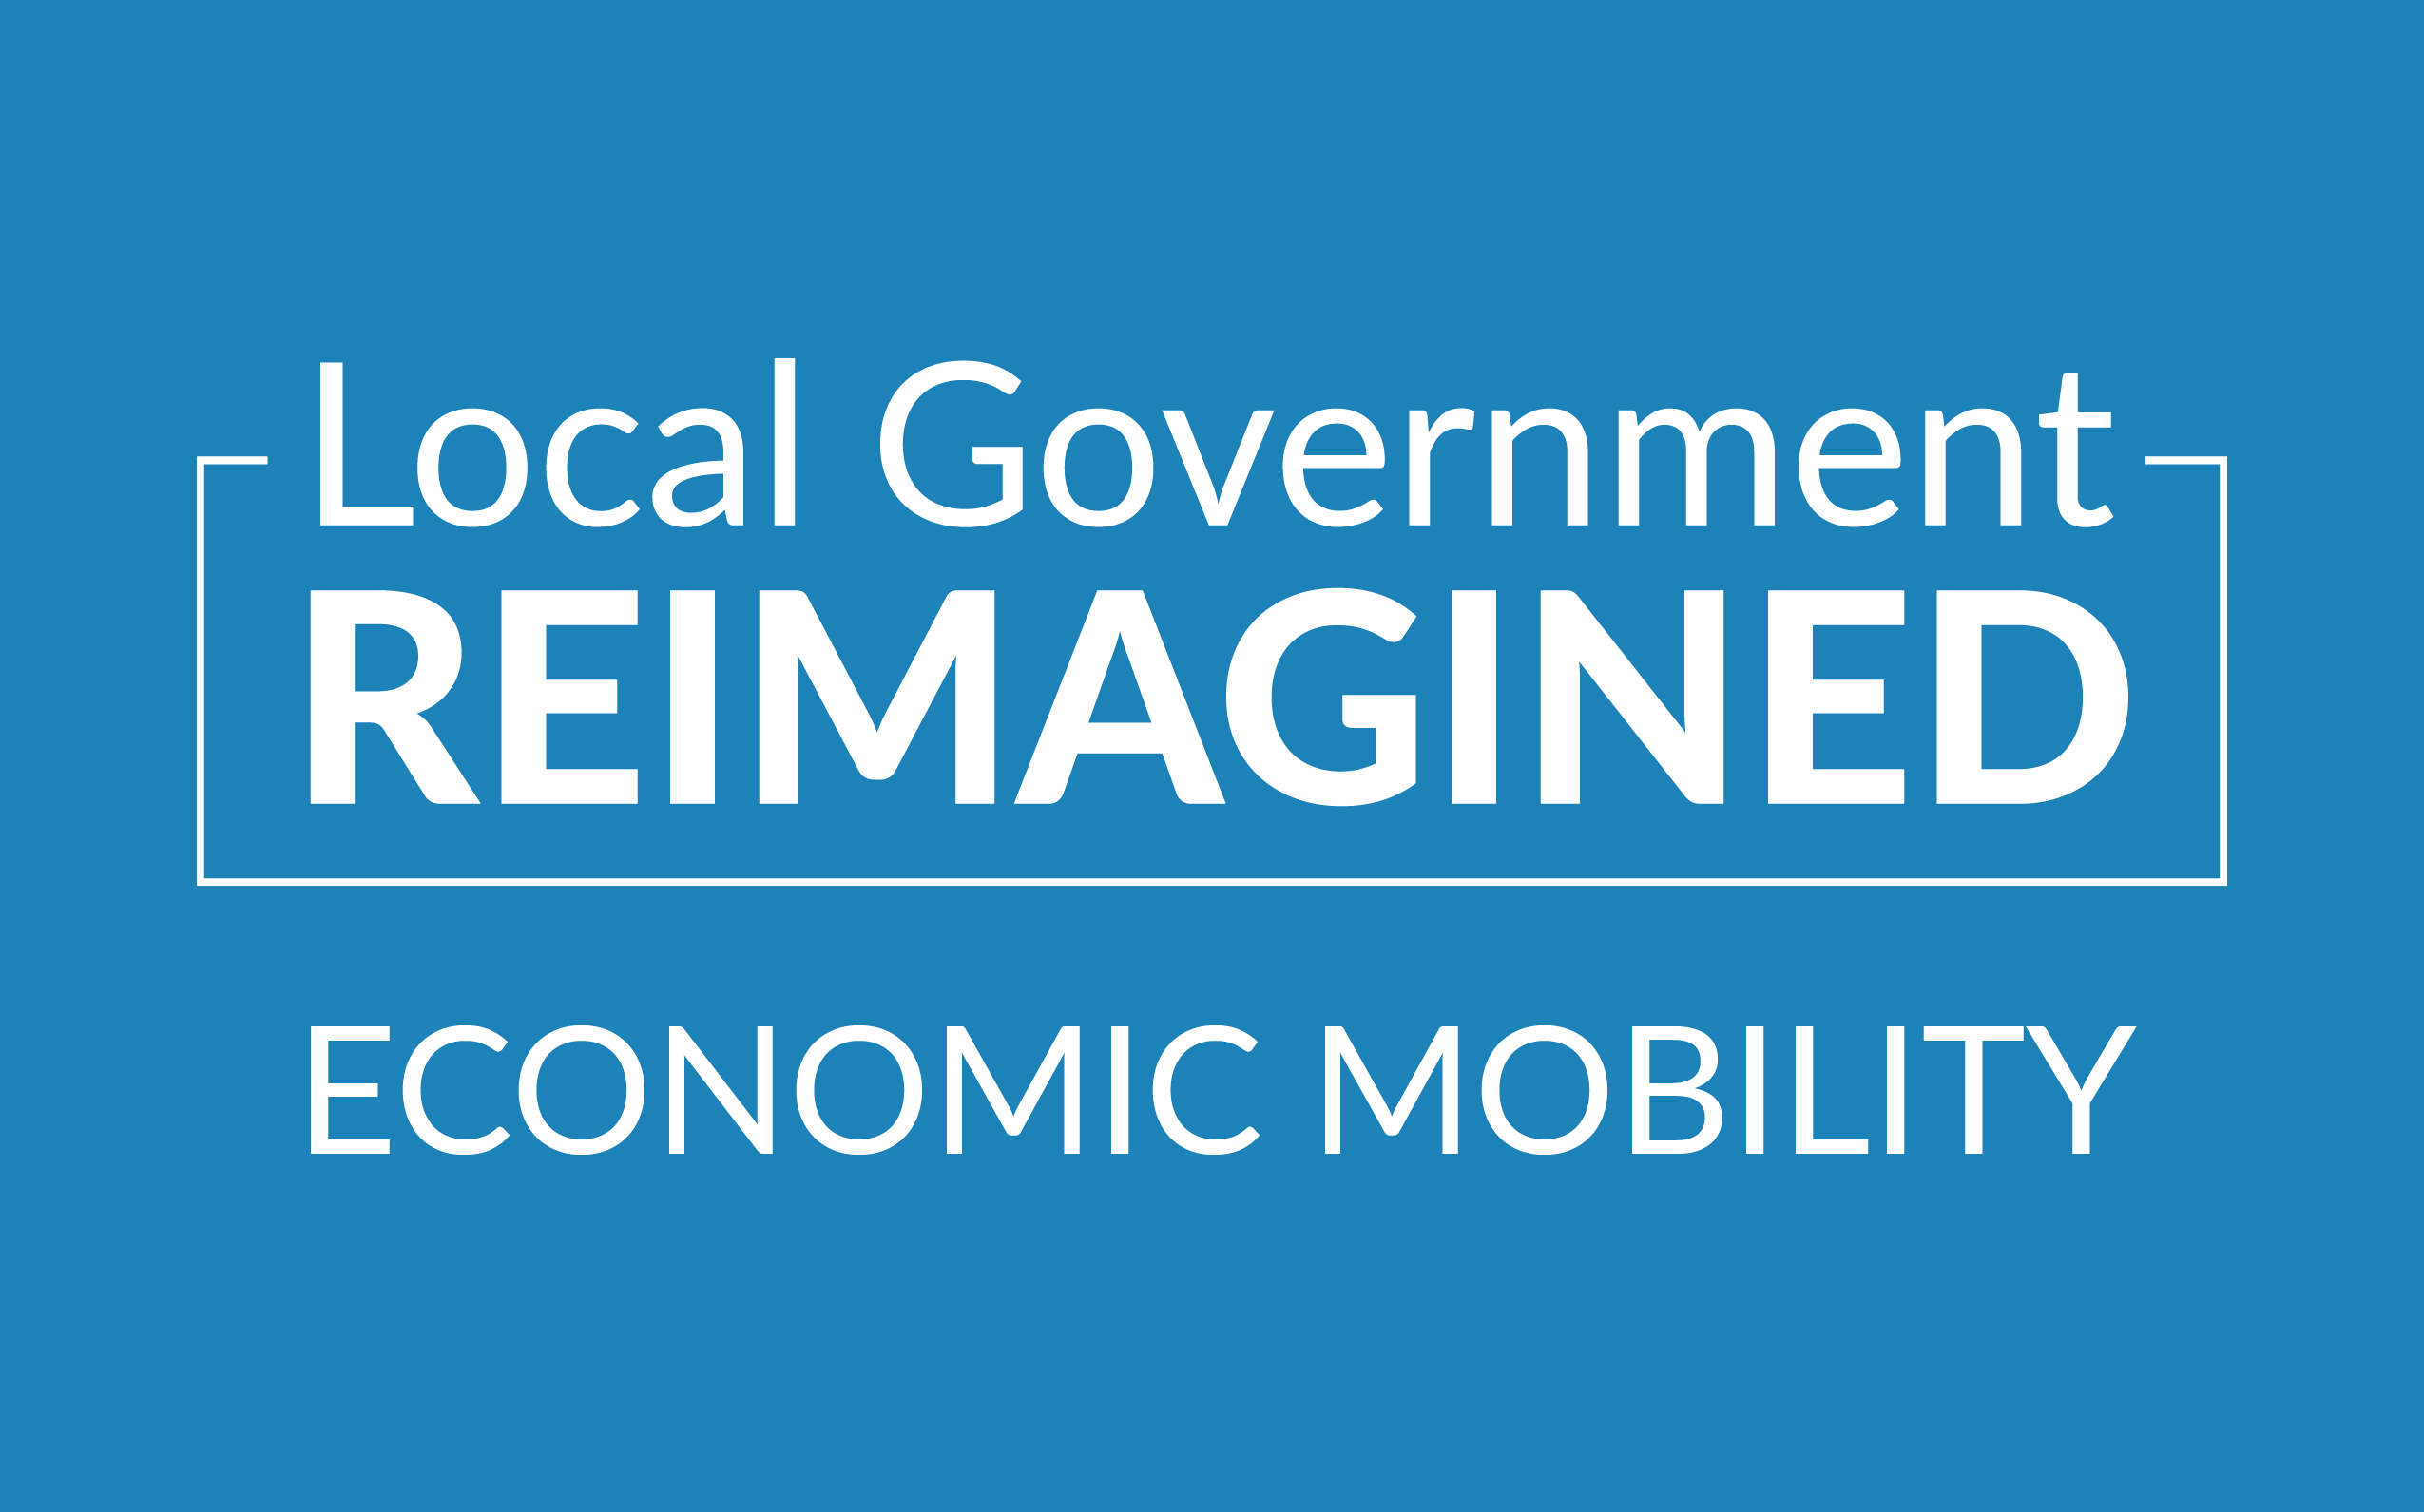 EMO-Teal-Local Government Reimagined